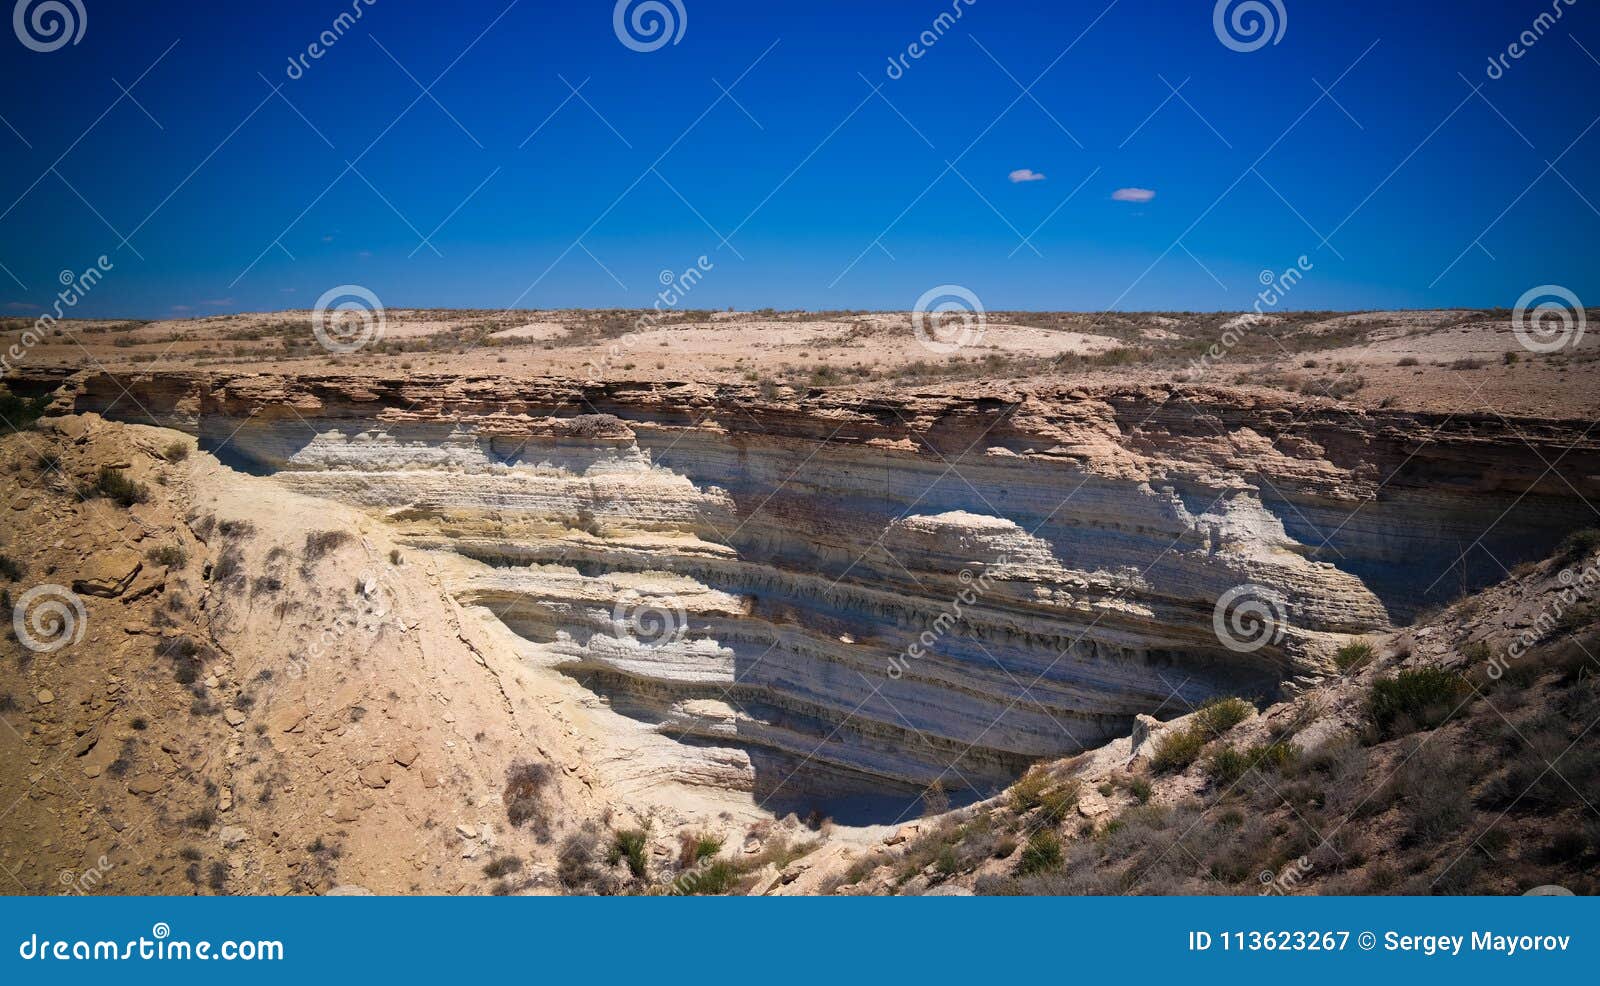 View To Saline Barsa Kelmes and Ustyurt Plateau in Stock Image - Image of earth, plateau: 113623267